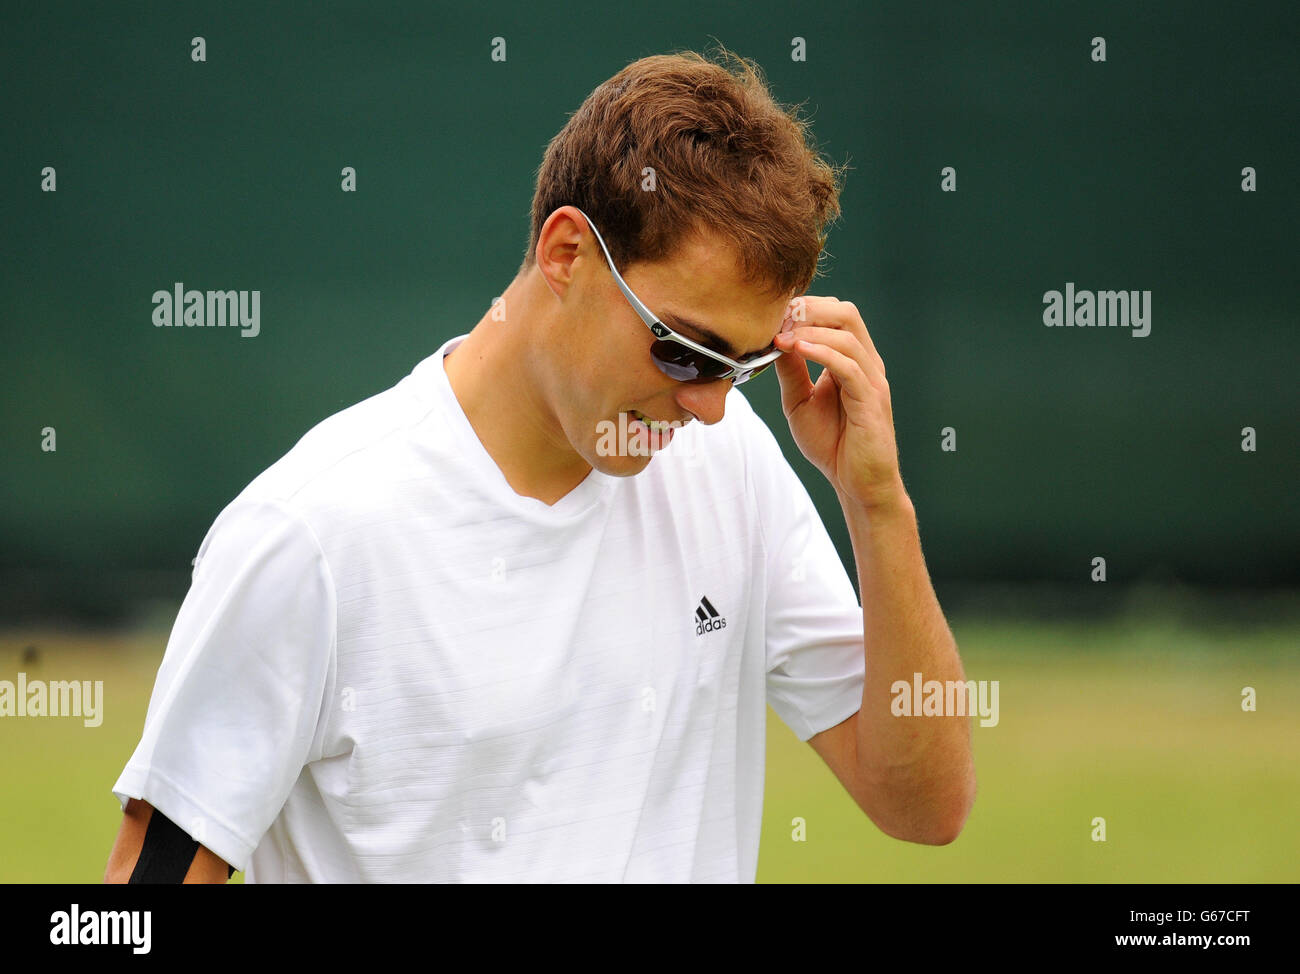 Poland's Jerzy Janowicz in a practice session during day ten of the Wimbledon Championships at The All England Lawn Tennis and Croquet Club, Wimbledon. Stock Photo